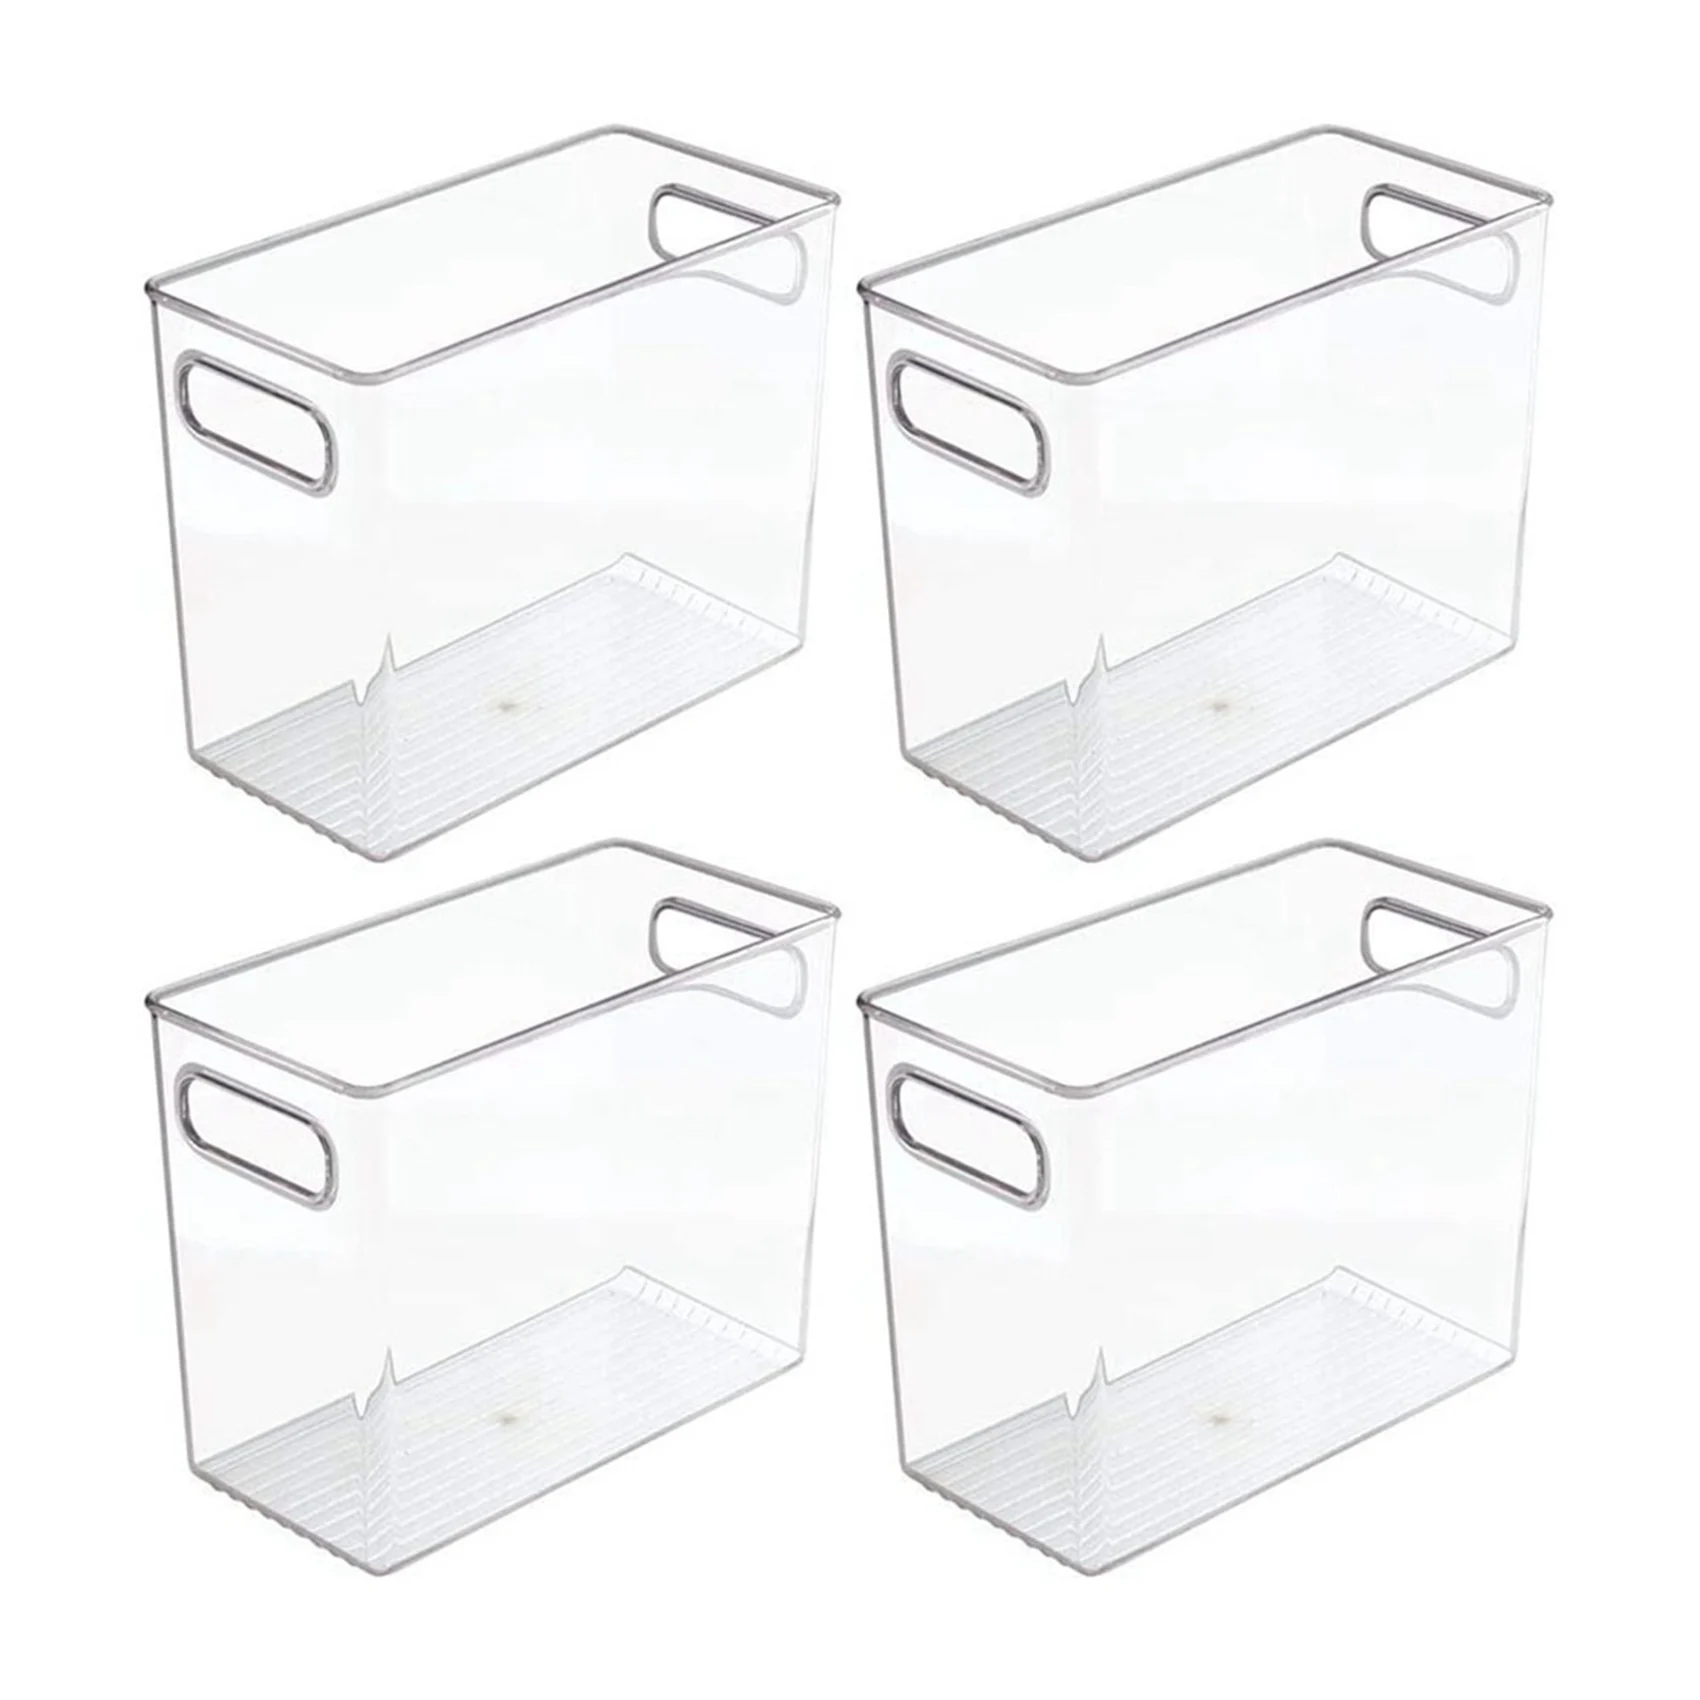 

4 Pack Tall Plastic Kitchen Pantry Cabinet Refrigerator or Freezer Food Storage Bin with Handles - Organizer for Fruit